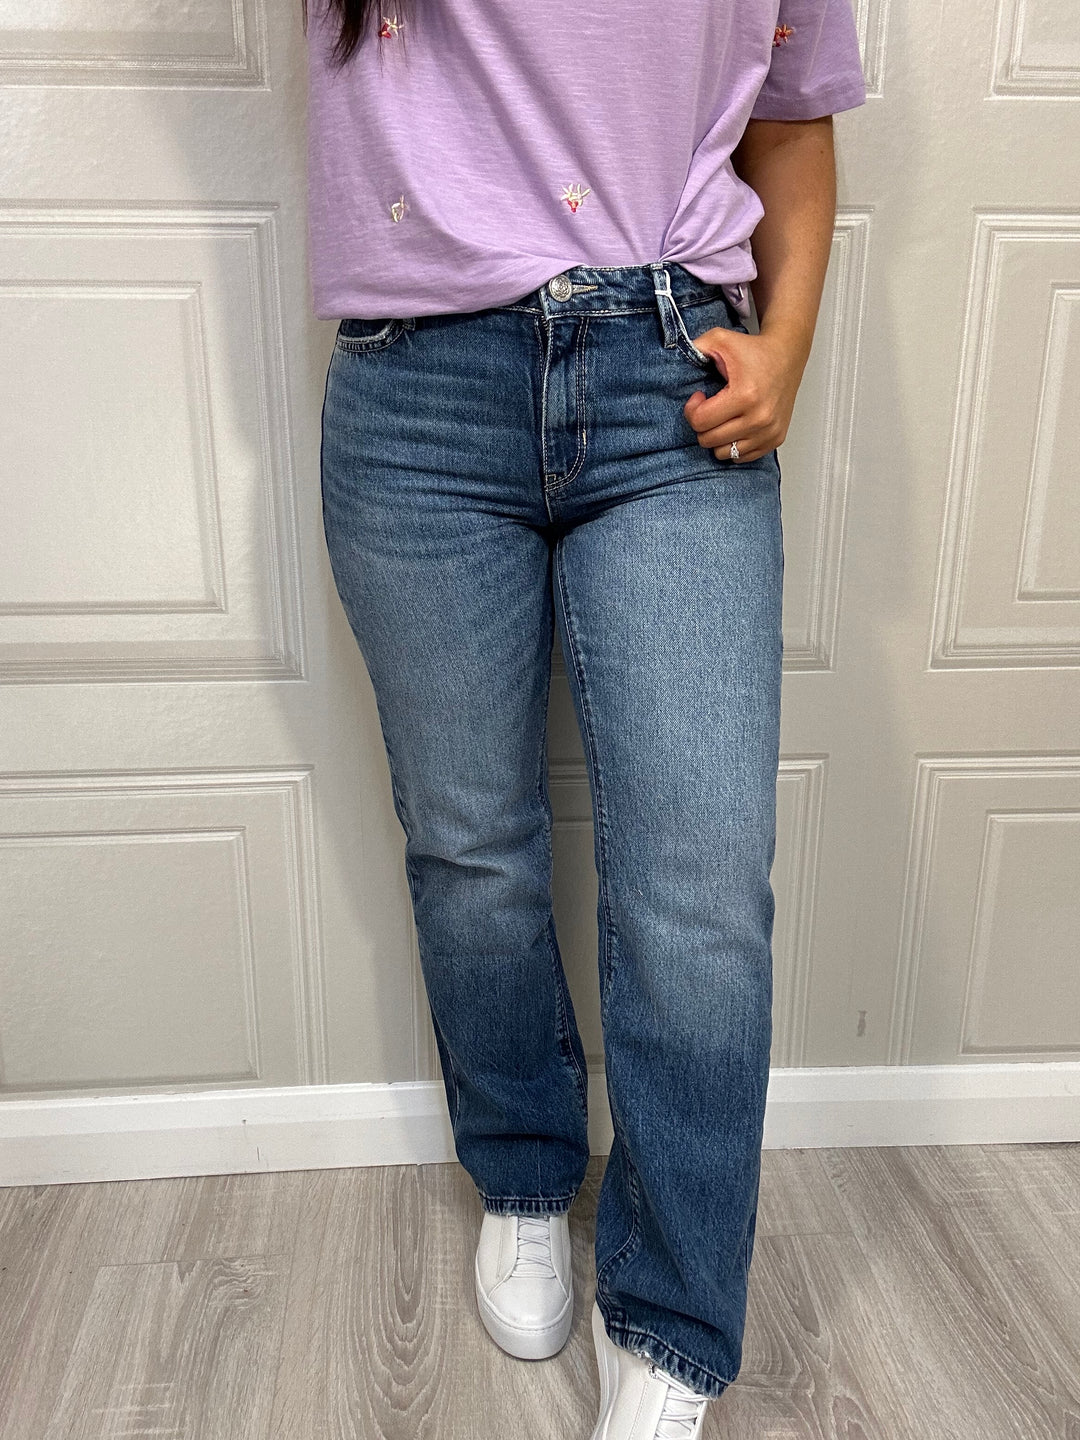 Guess 1981 Straight Denim Jeans